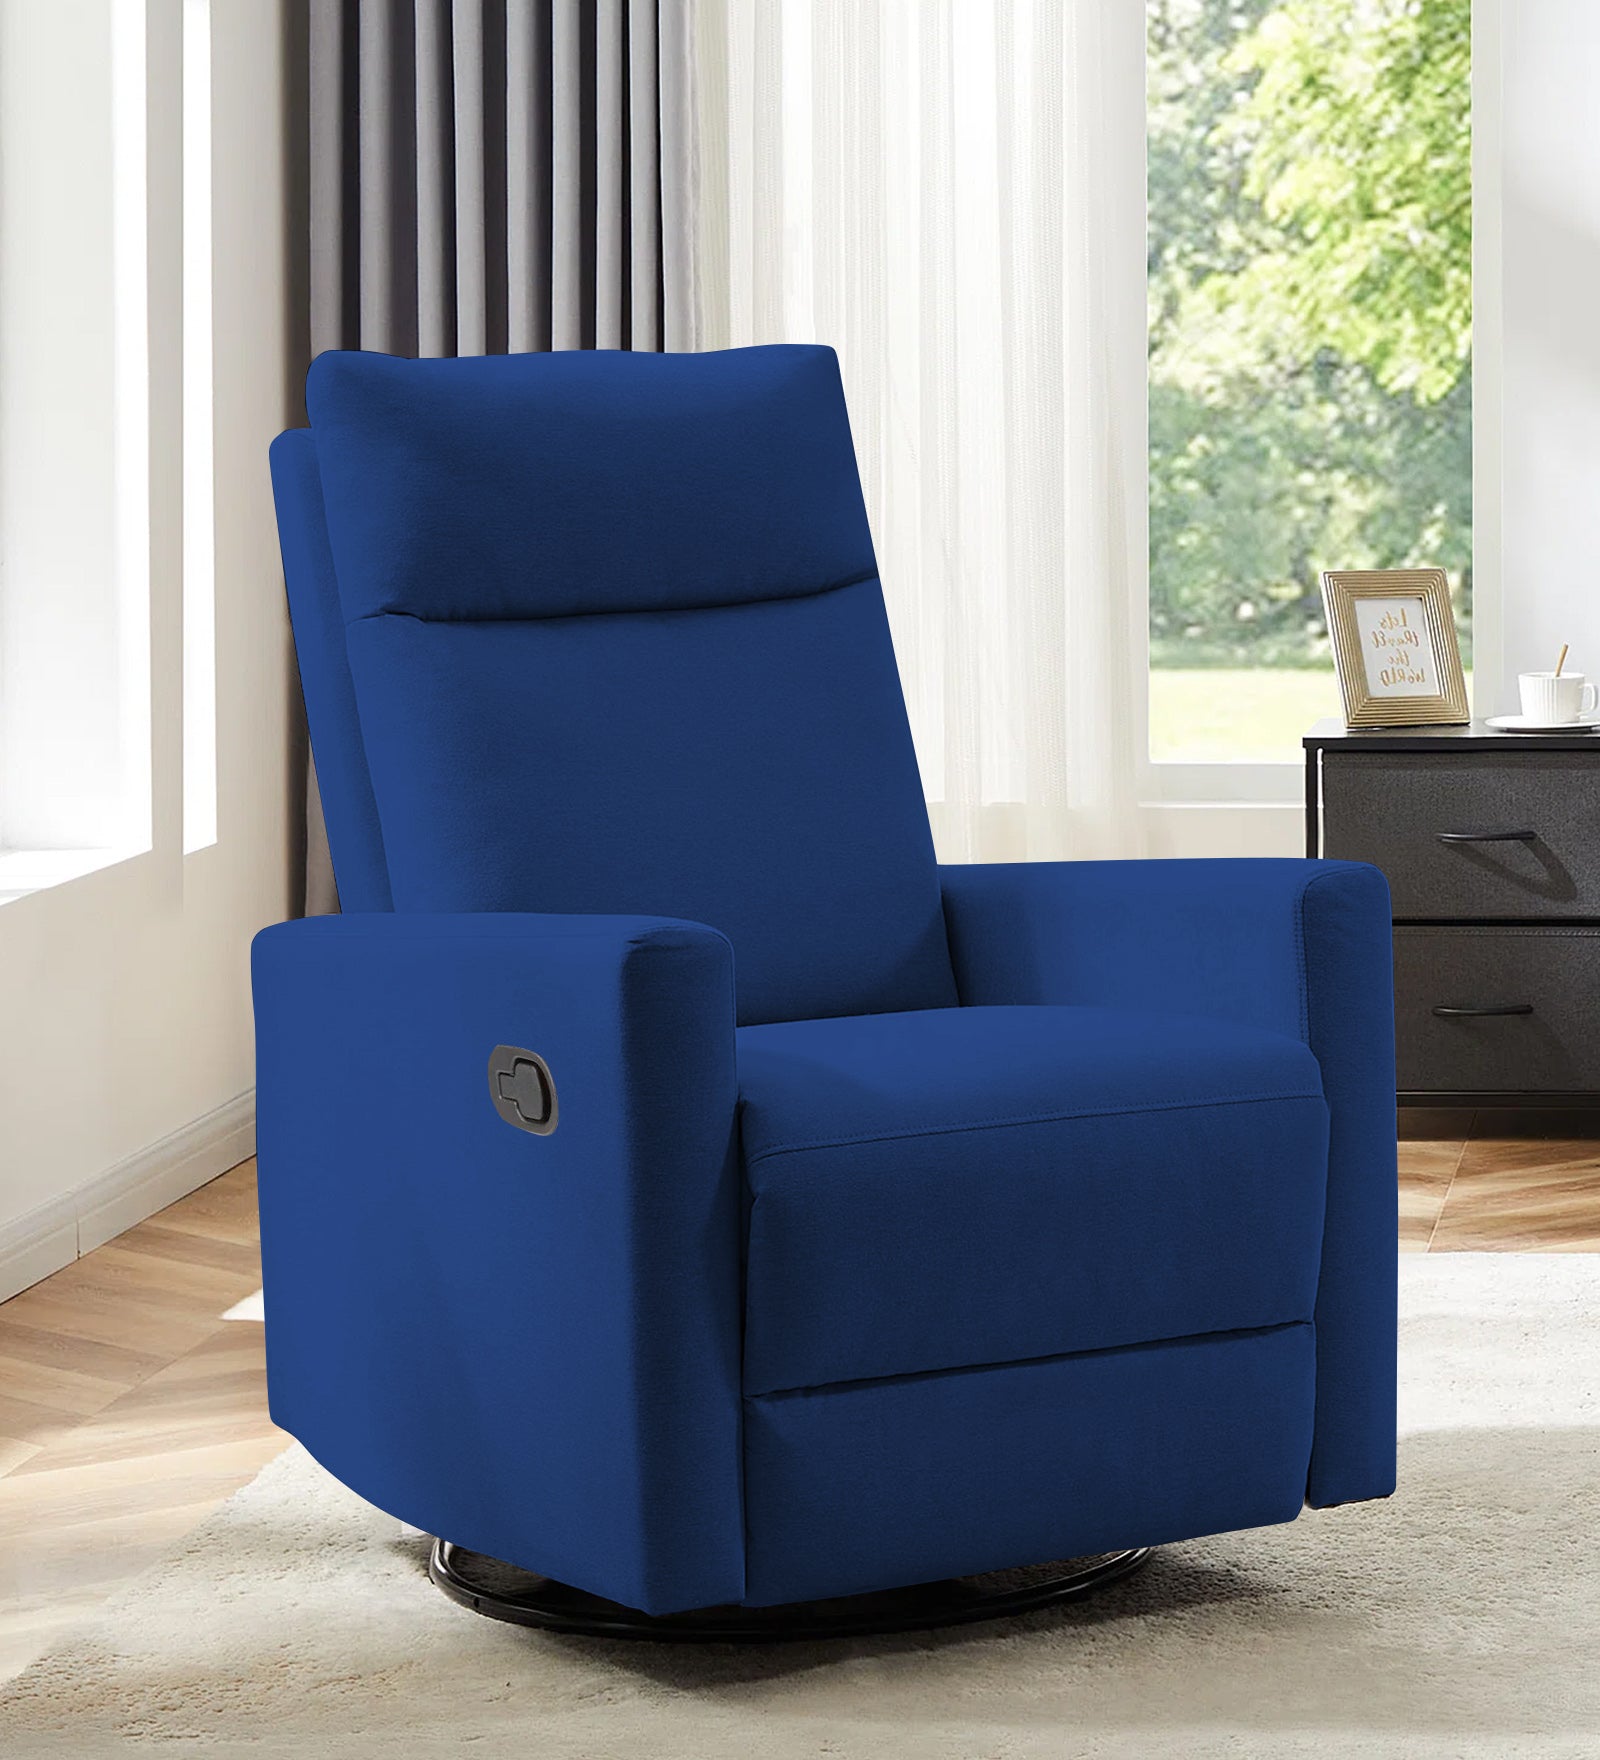 Zura Fabric Manual 1 Seater Recliner In Royal Blue Colour